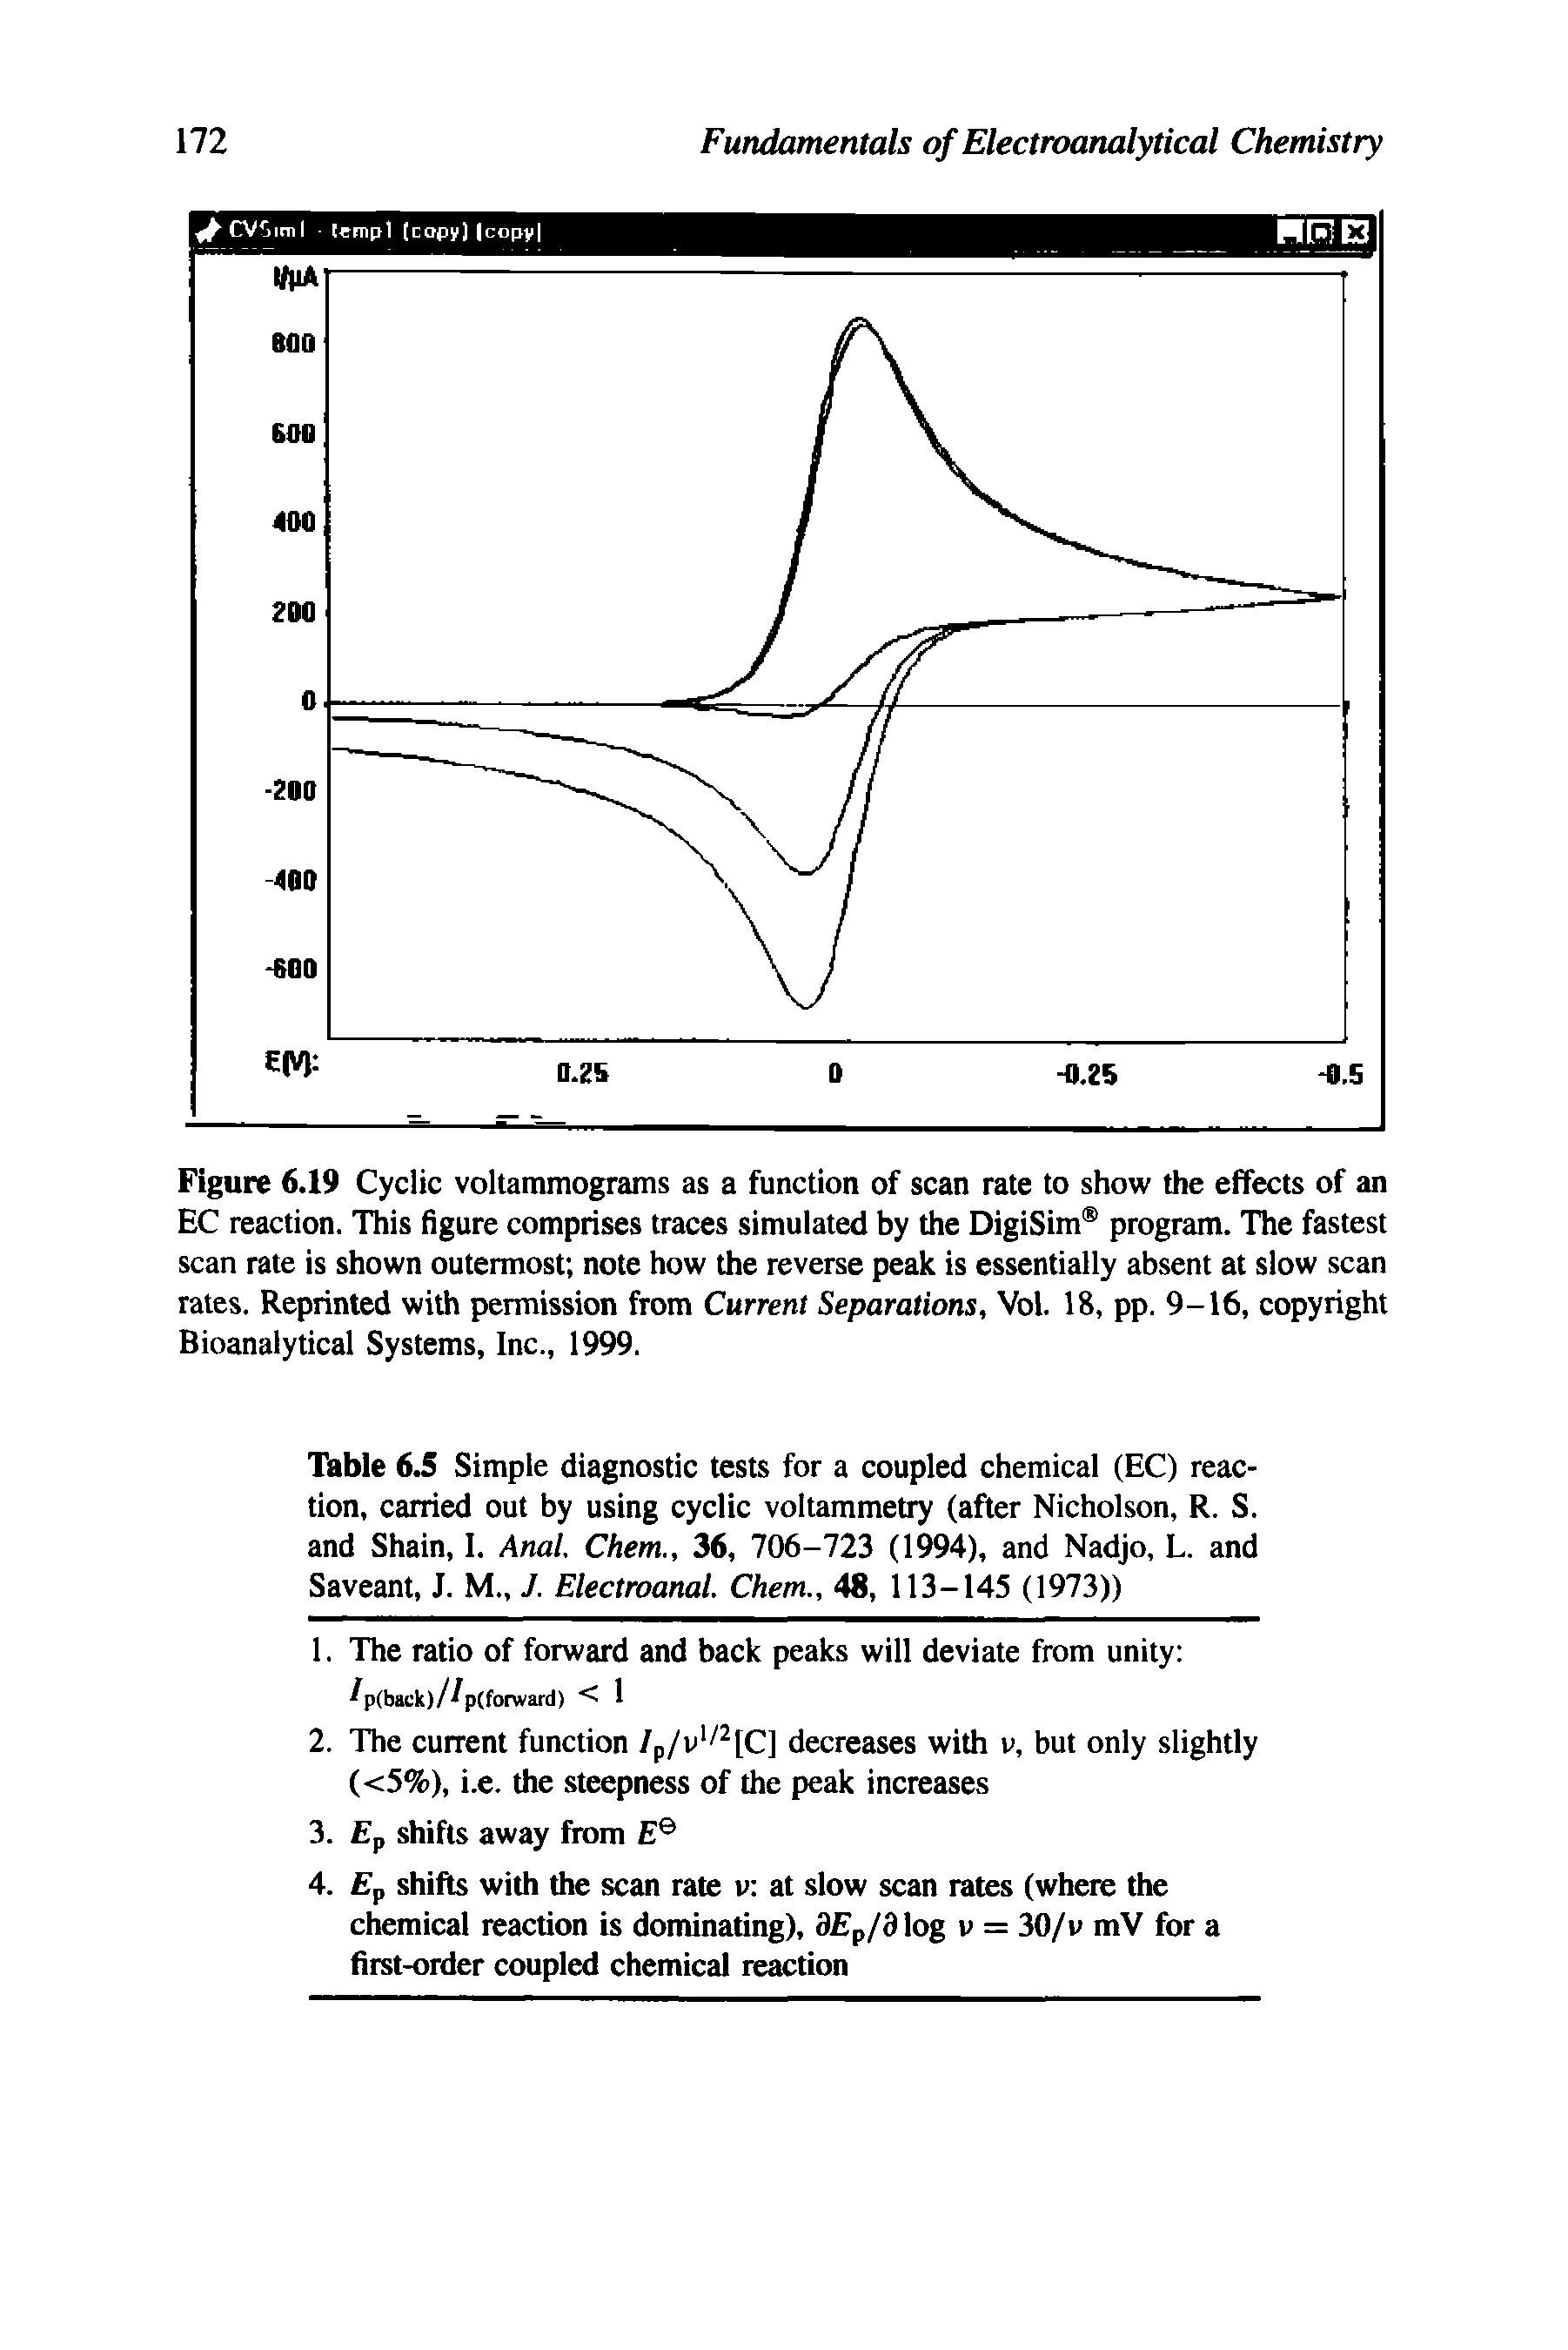 Table 6.5 Simple diagnostic tests for a coupled chemical (EC) reaction, carried out by using cyclic voltammetry (after Nicholson, R. S. and Shain, I. Anal. Chem., 36, 706-723 (1994), and Nadjo, L. and Saveant, J. M., J. Electroanal. Chem., 48, 113-145 (1973))...